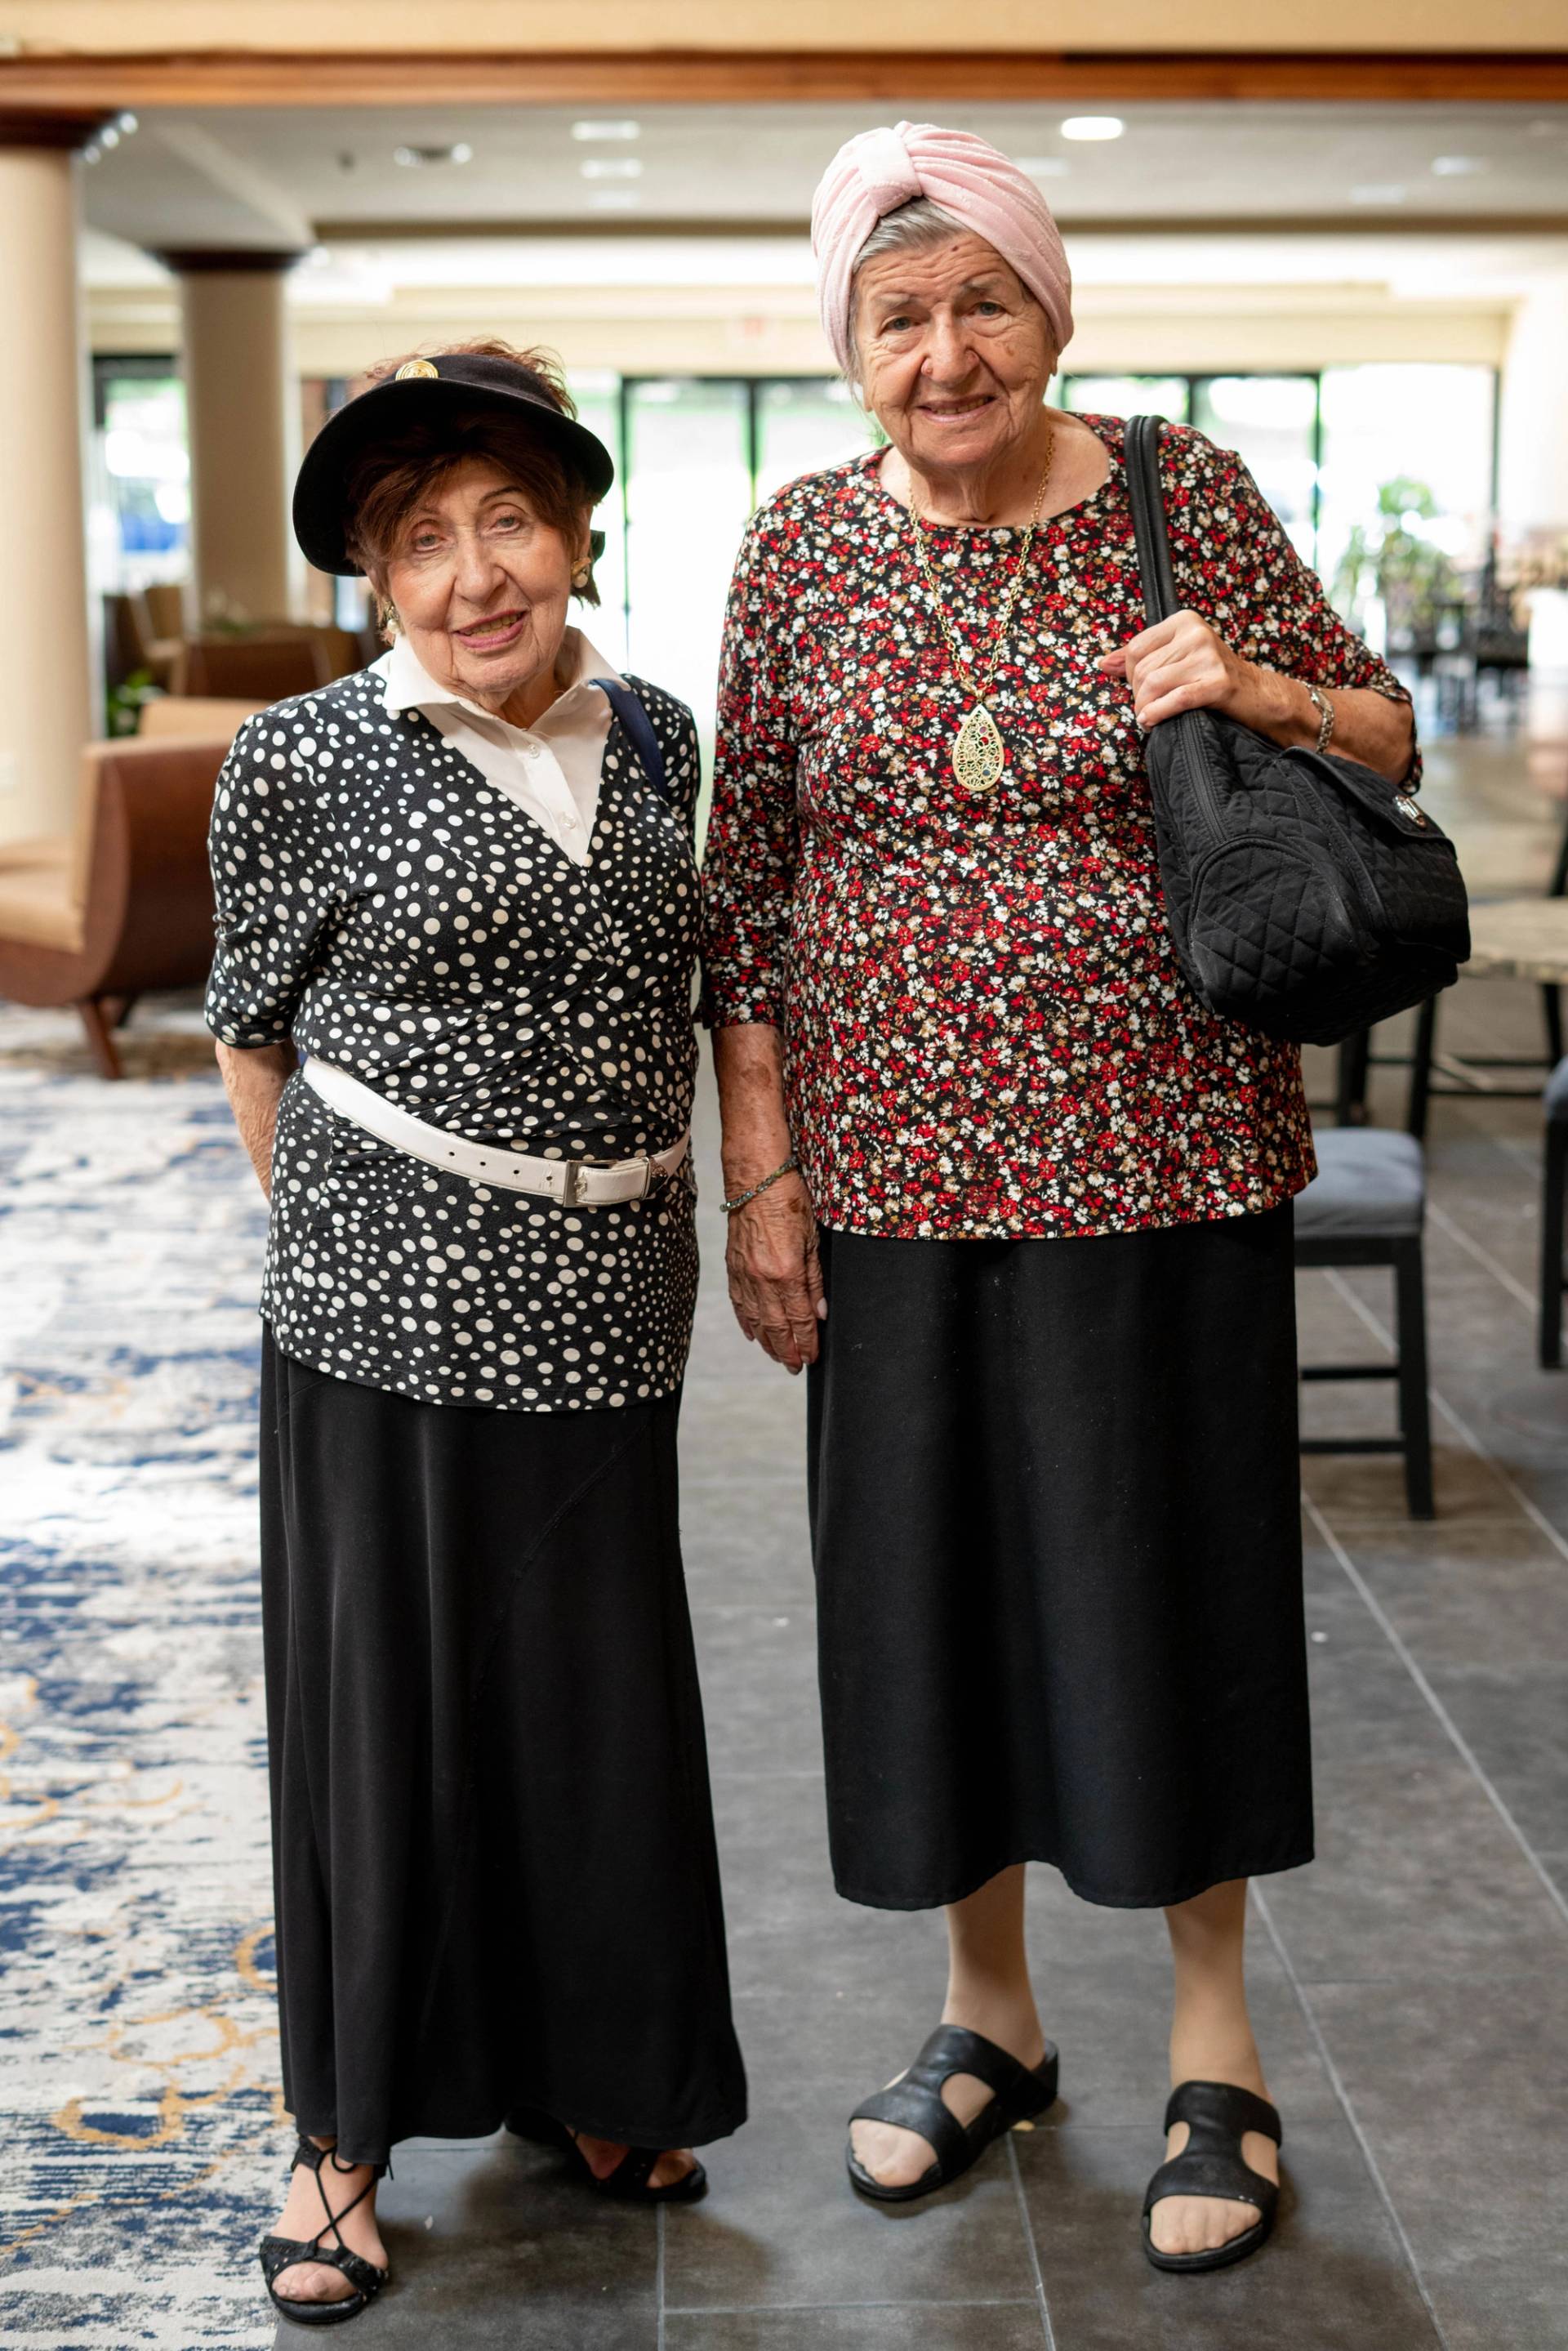 Attendees of this year's annual summer retreat for Holocaust survivors at the Granit Hotel in Kerhonkson, New York